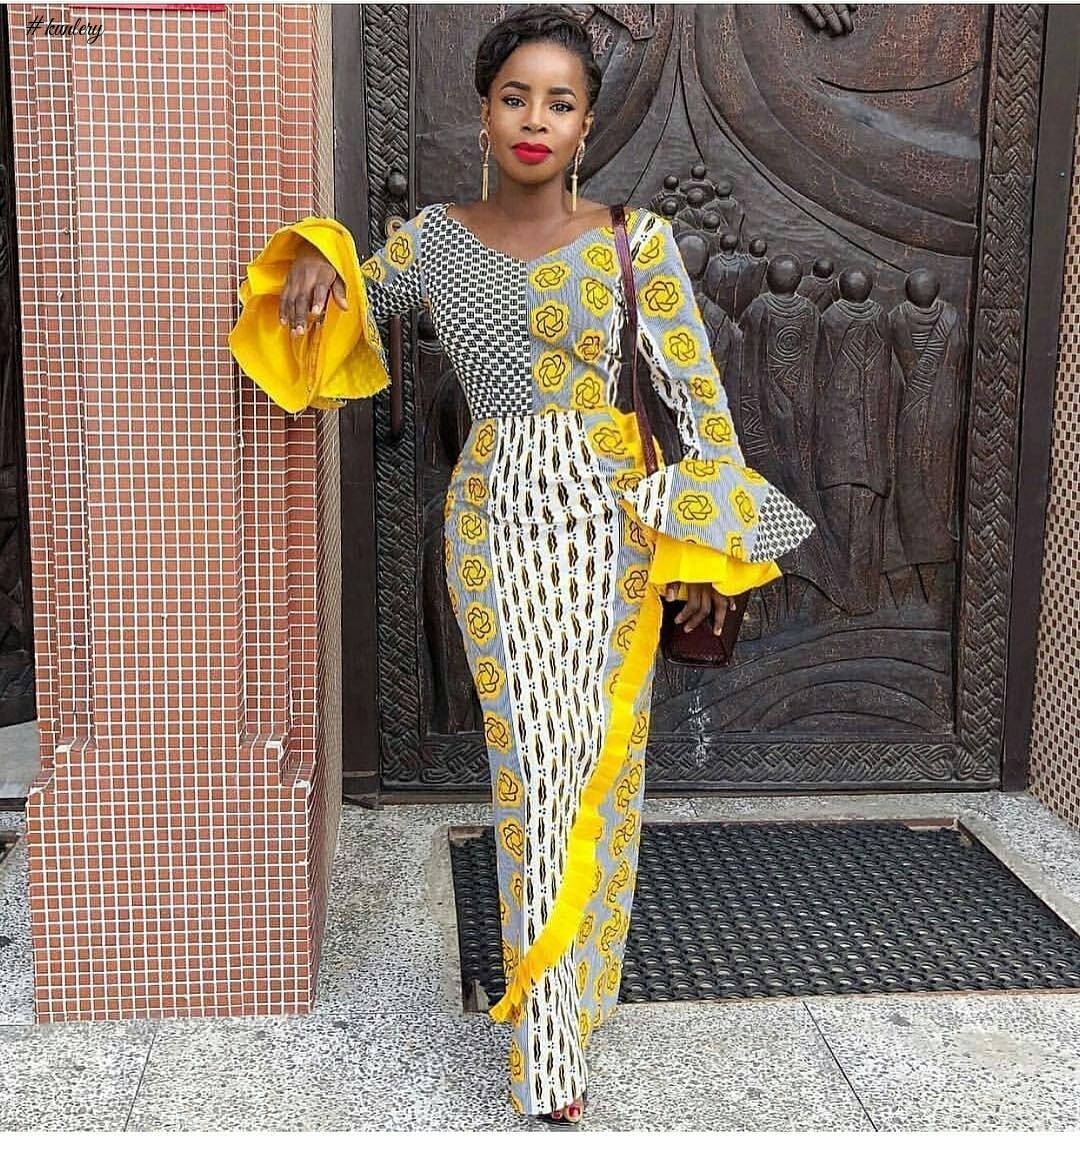 TRUST ME! THESE ANKARA STYLES ARE WORTH SWOONING OVER